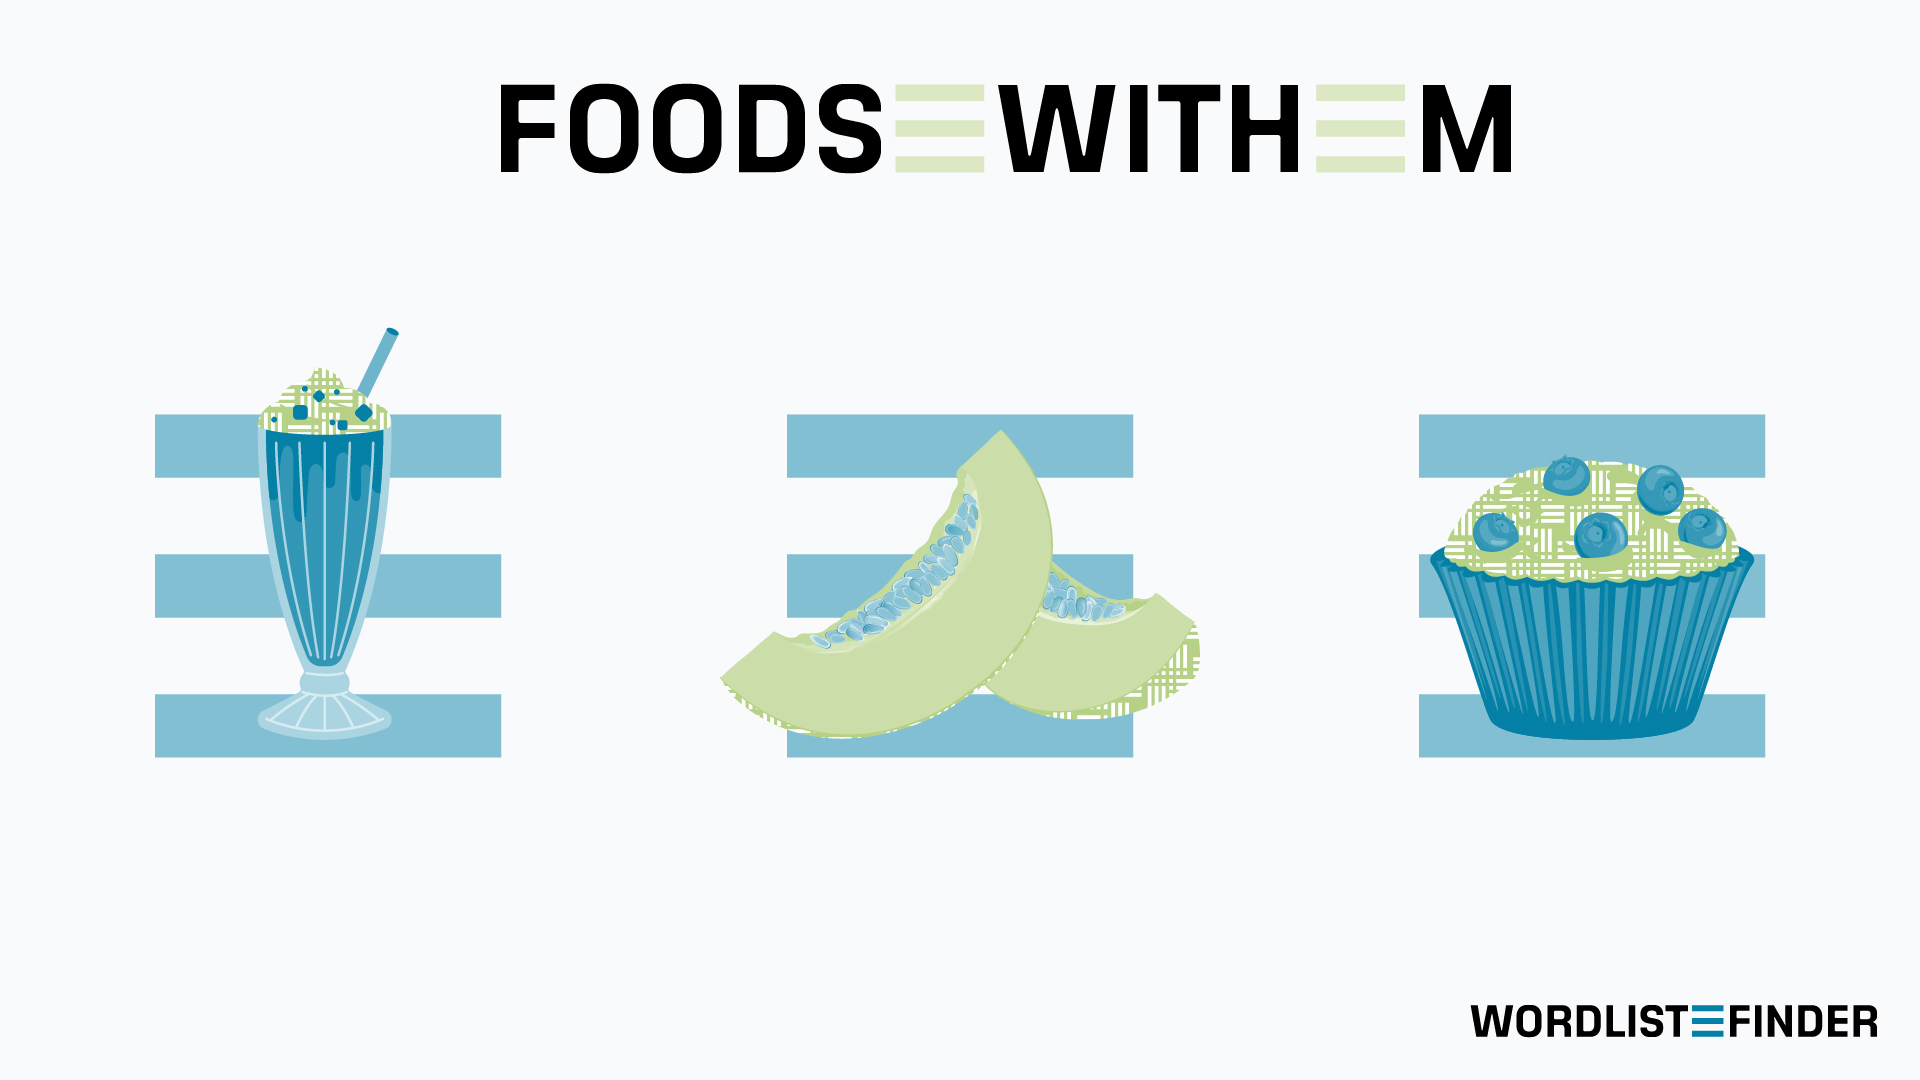 Foods That Start With M